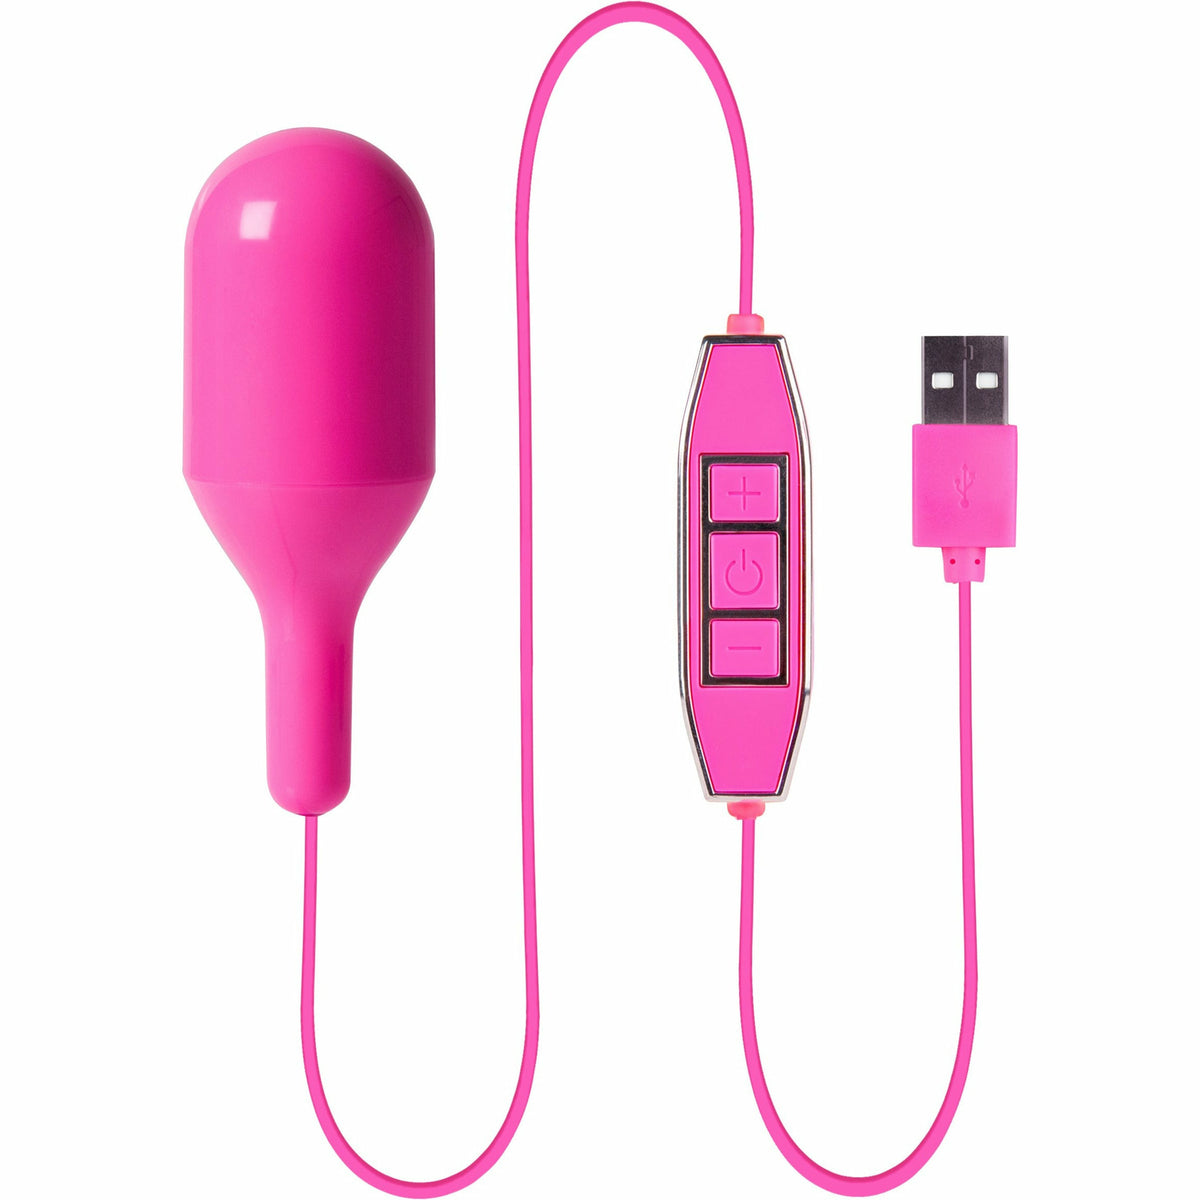 NMC Handy Perky - Bullet Vibrator with Remote - Rechargeable - Pink